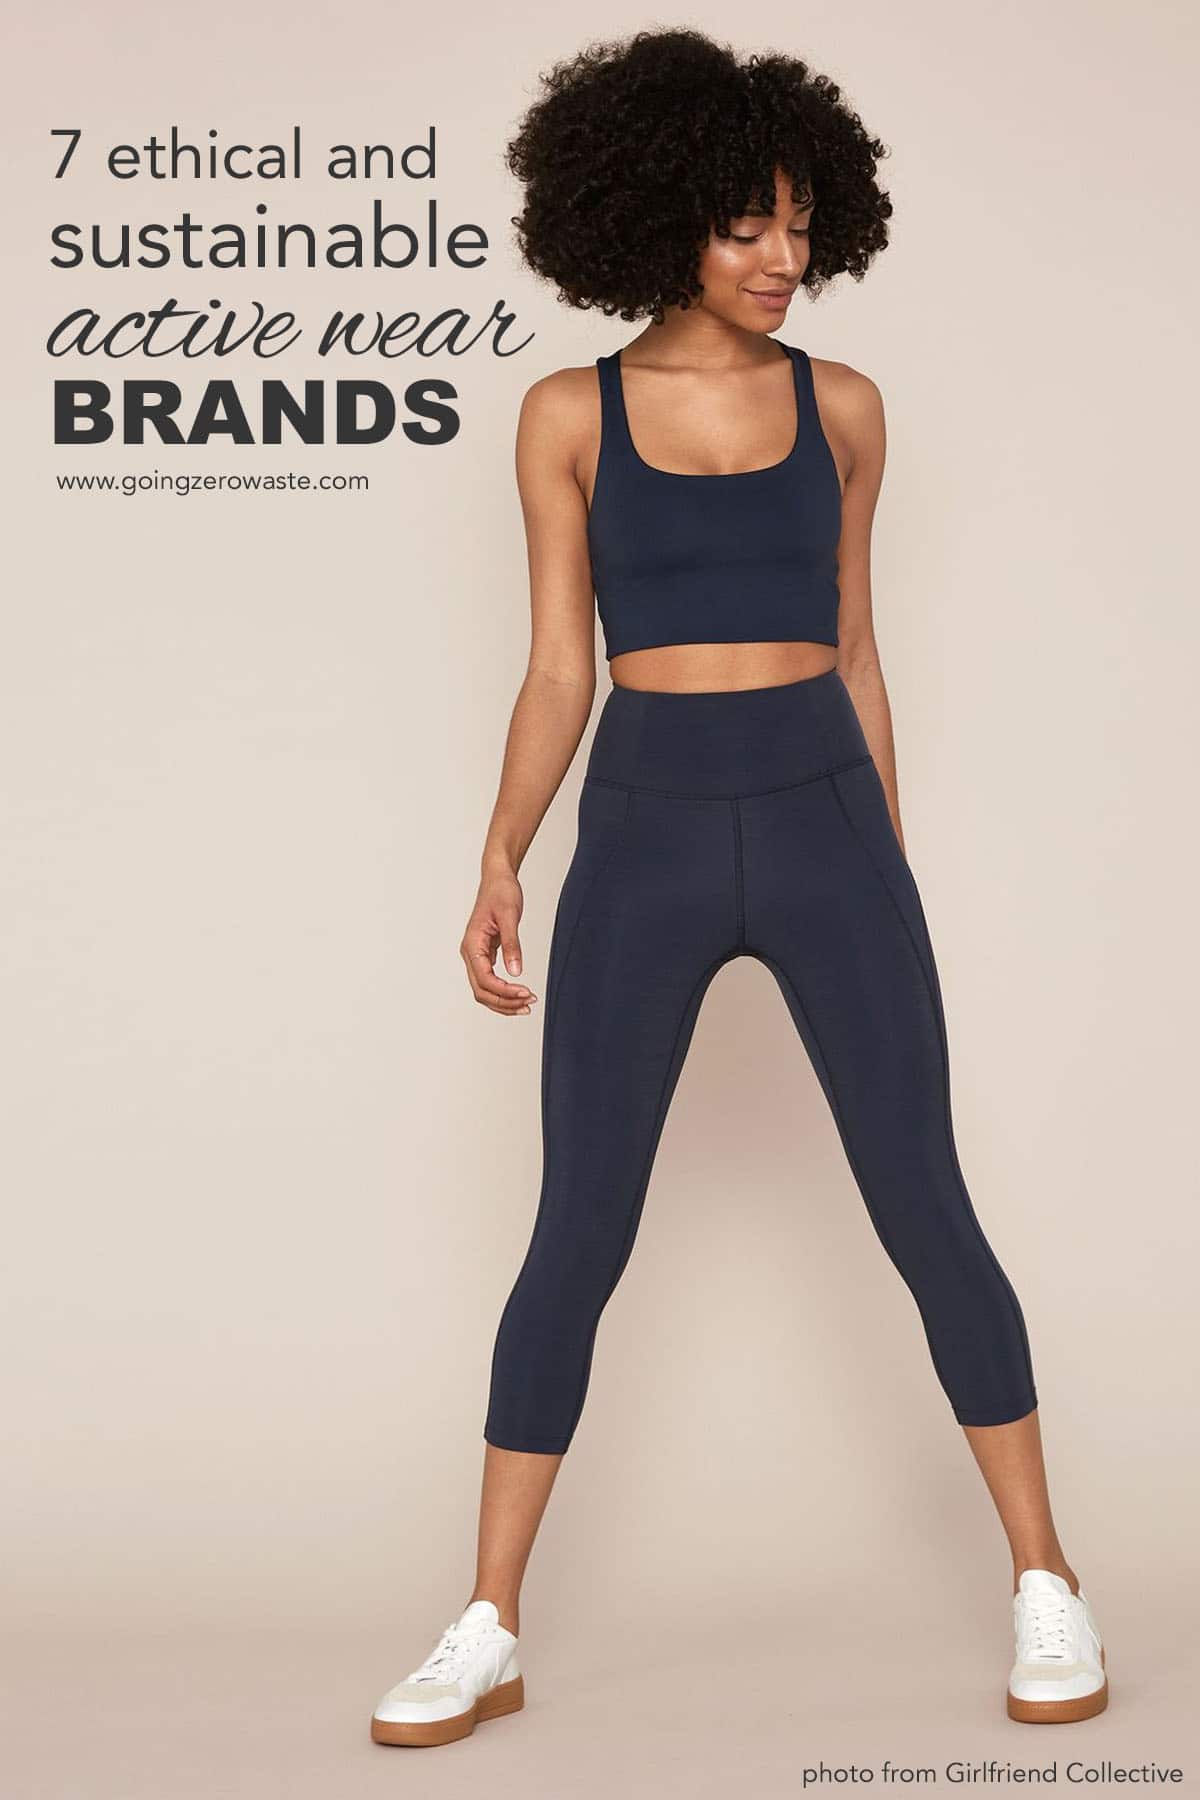 9 Ethical and Sustainable Activewear Brands